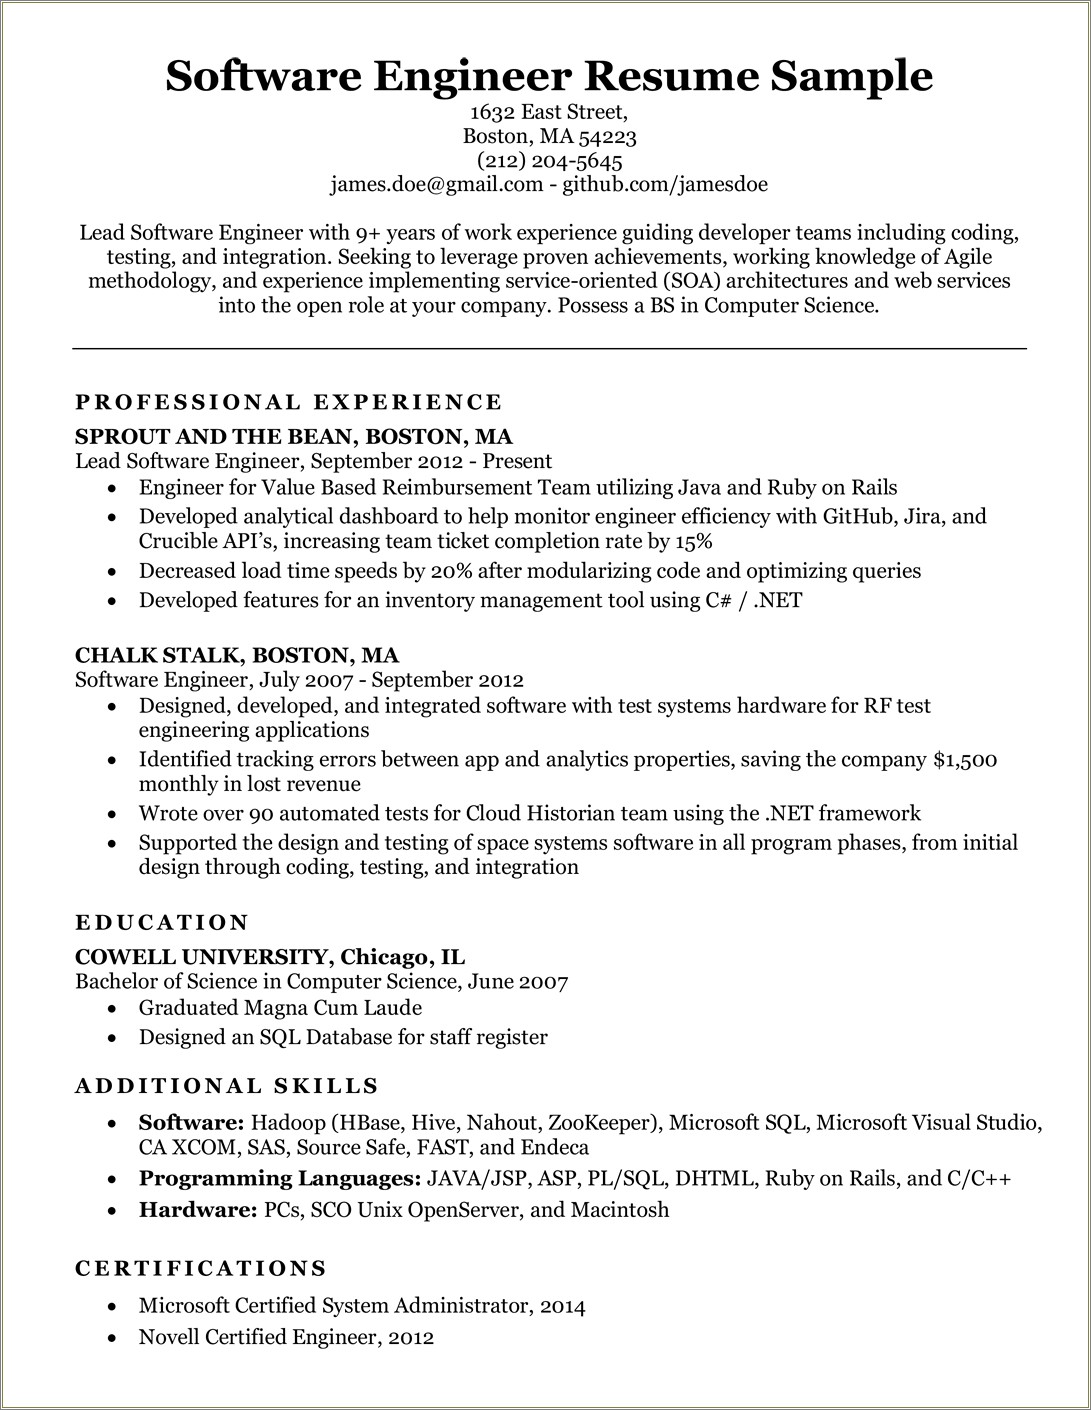 Examples Of Sytems Integration Responsibilities In A Resume